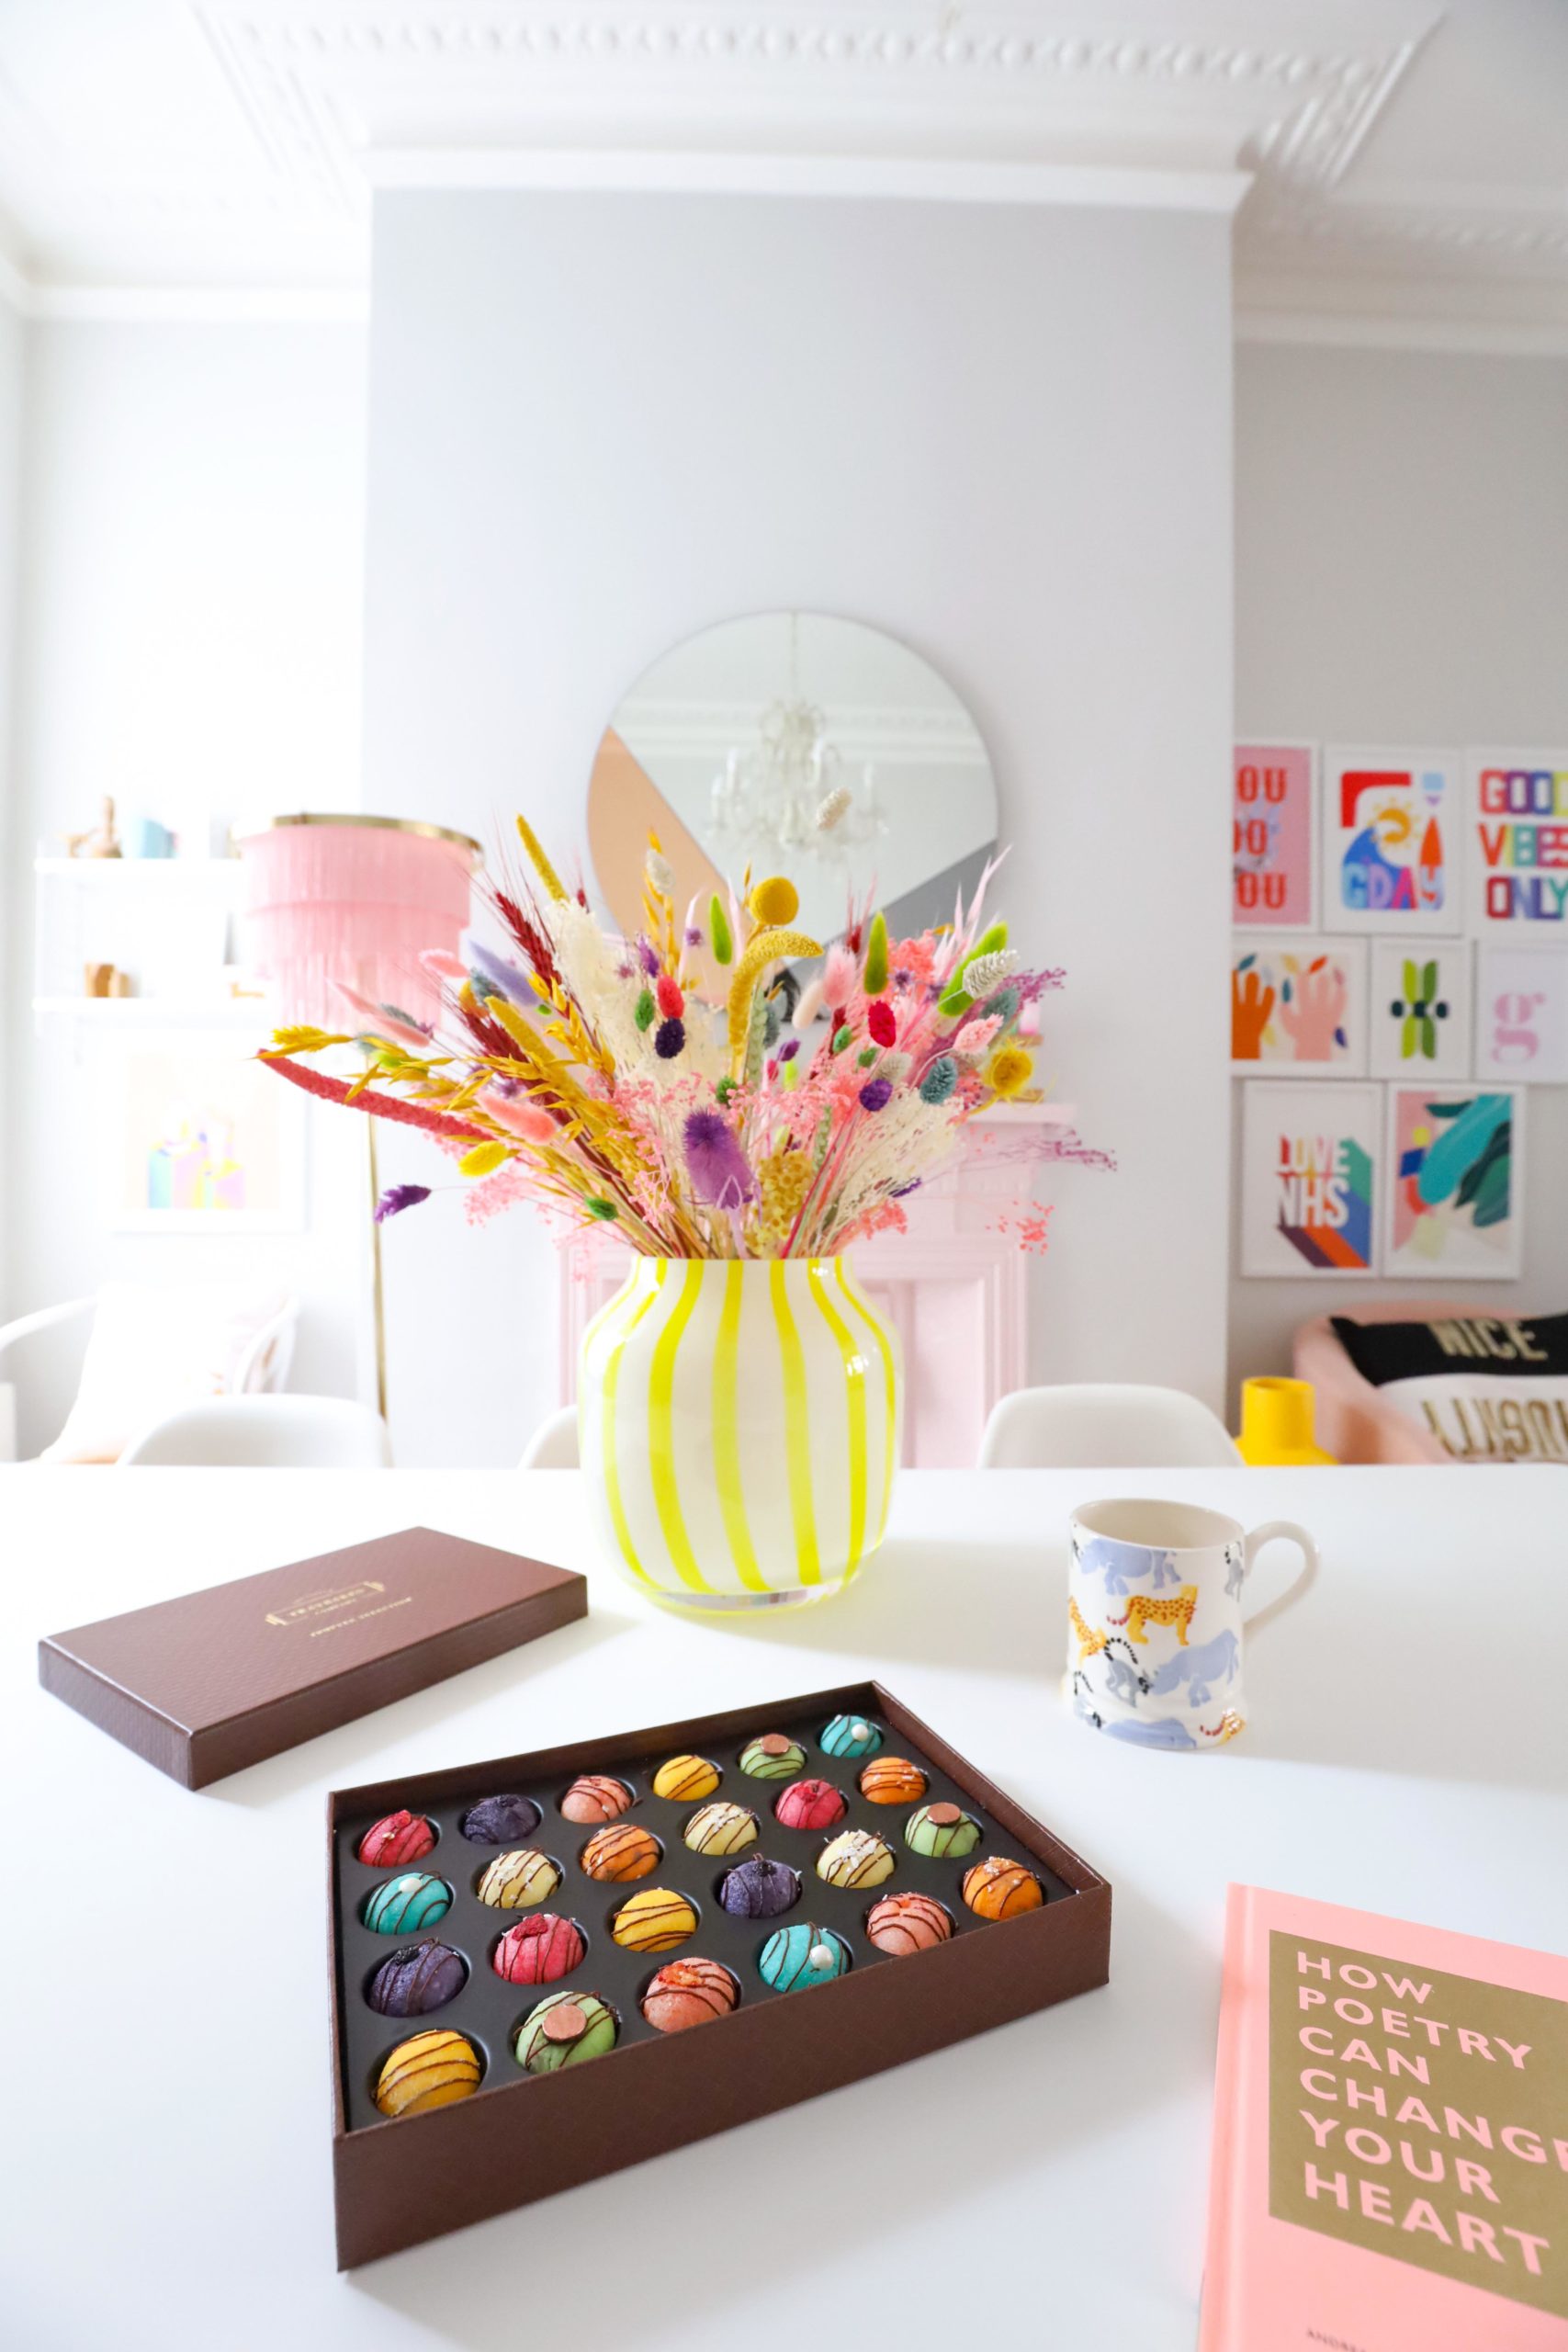 Colours at home are an instant happy mood booster.